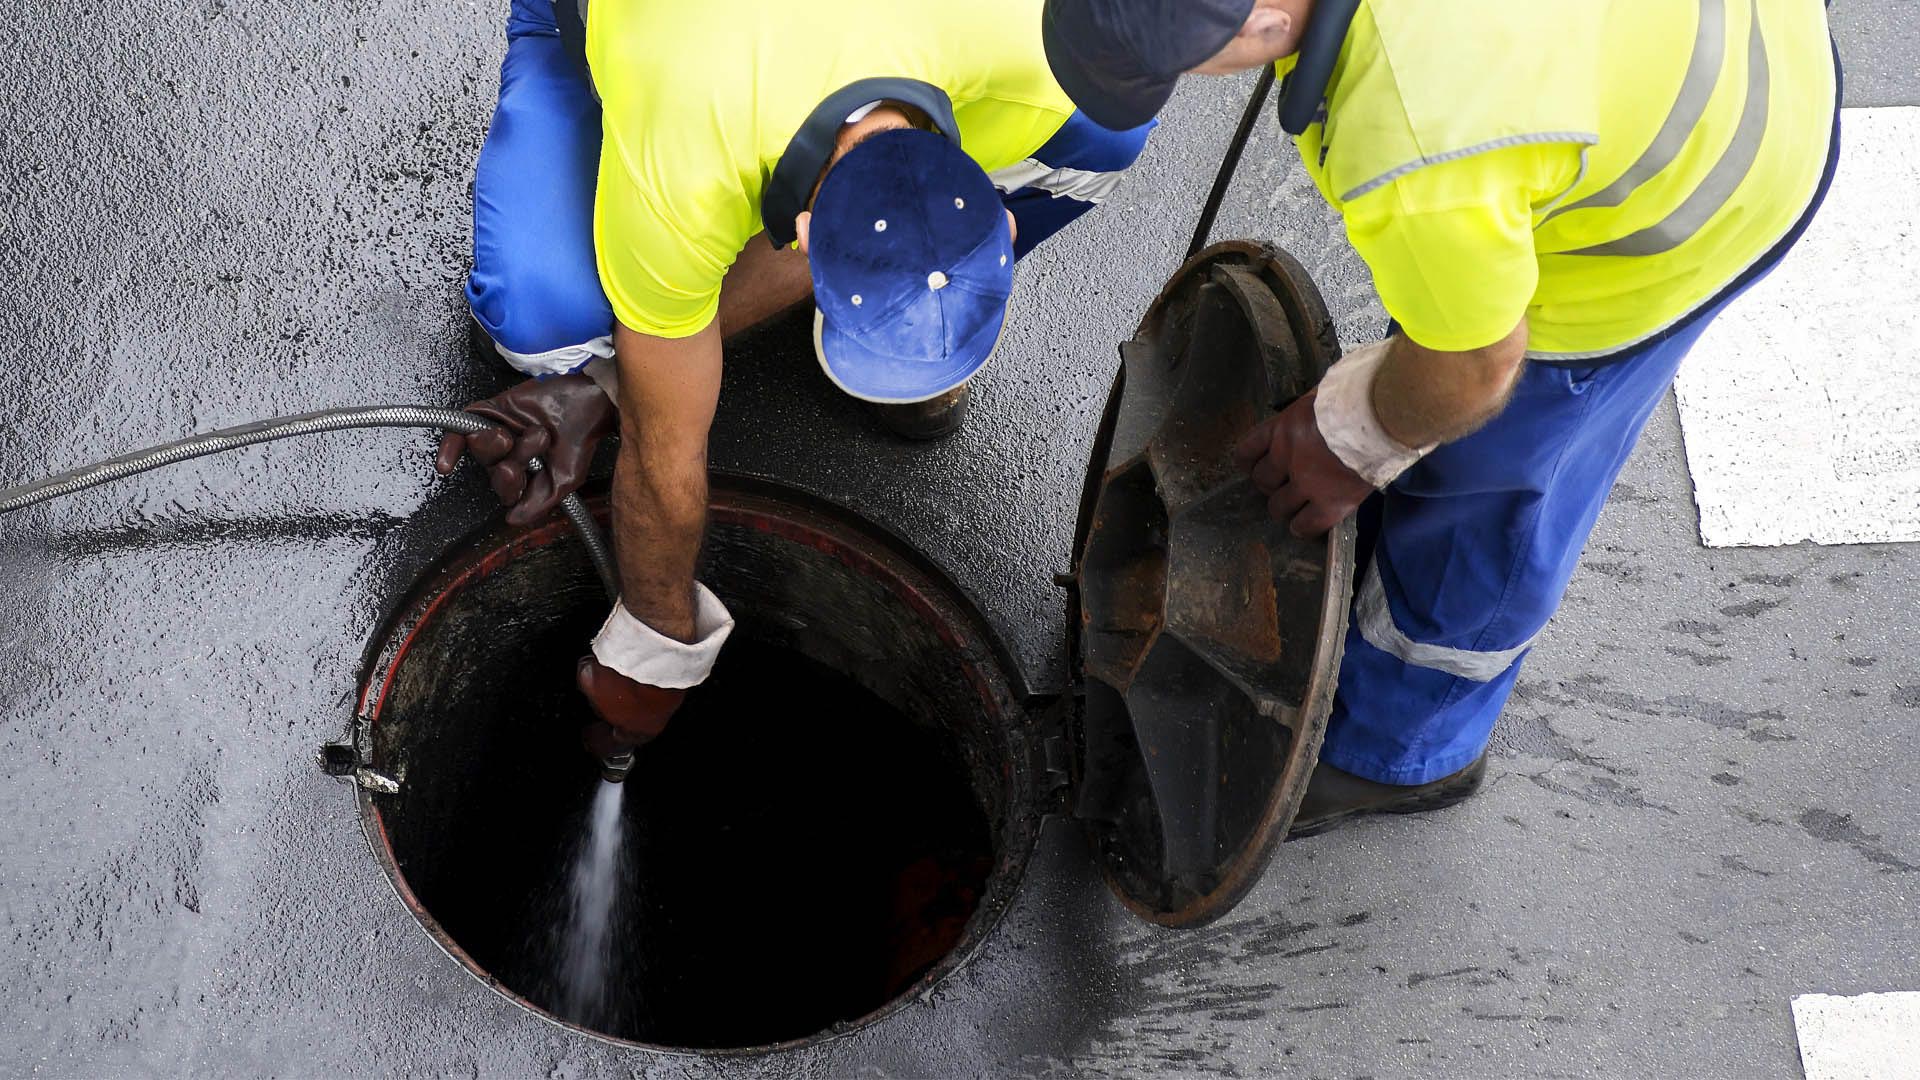 sewer line repair services